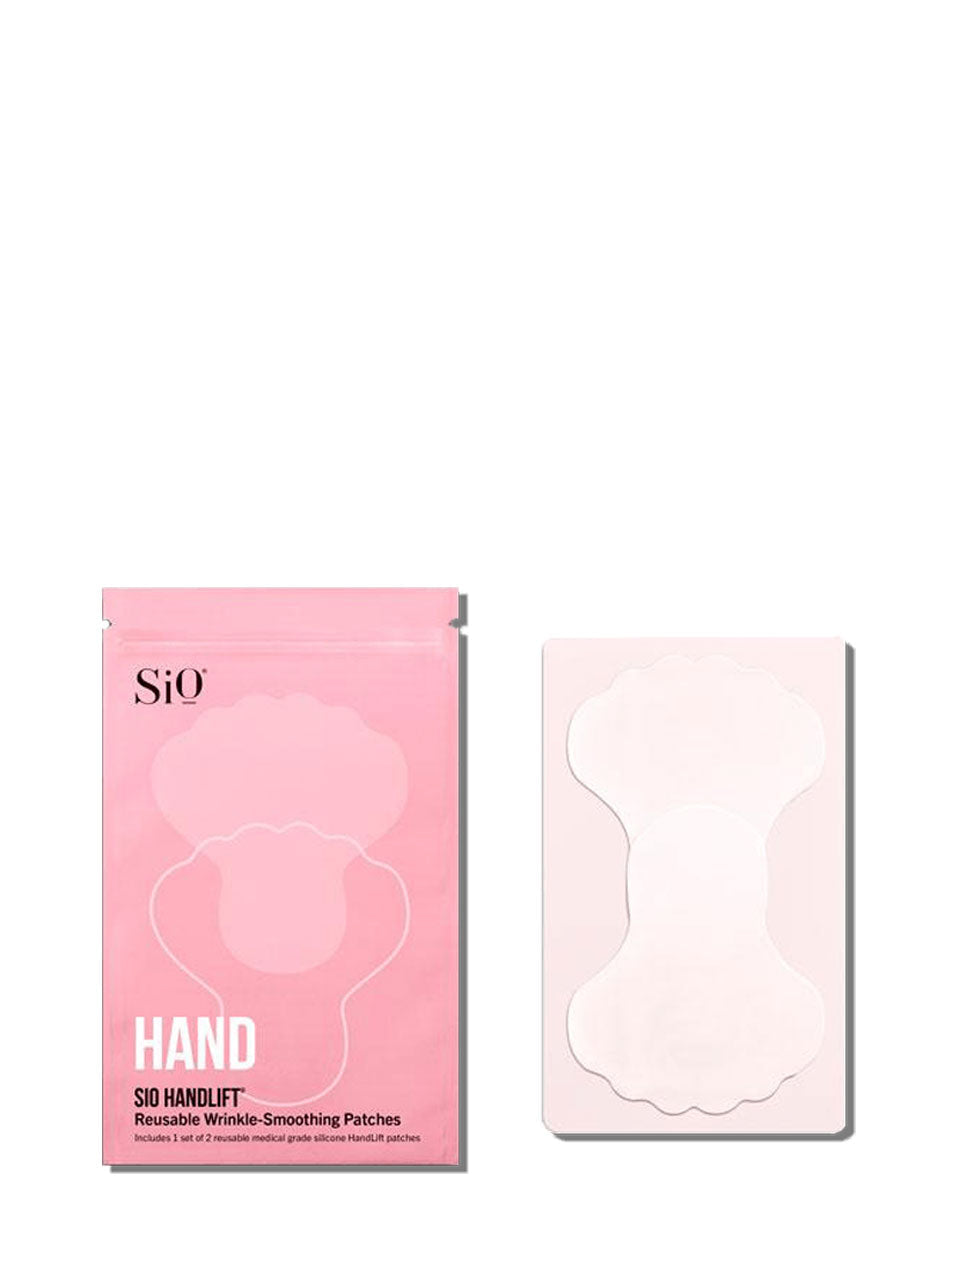 HandLift Patches Body Care Sio Beauty 